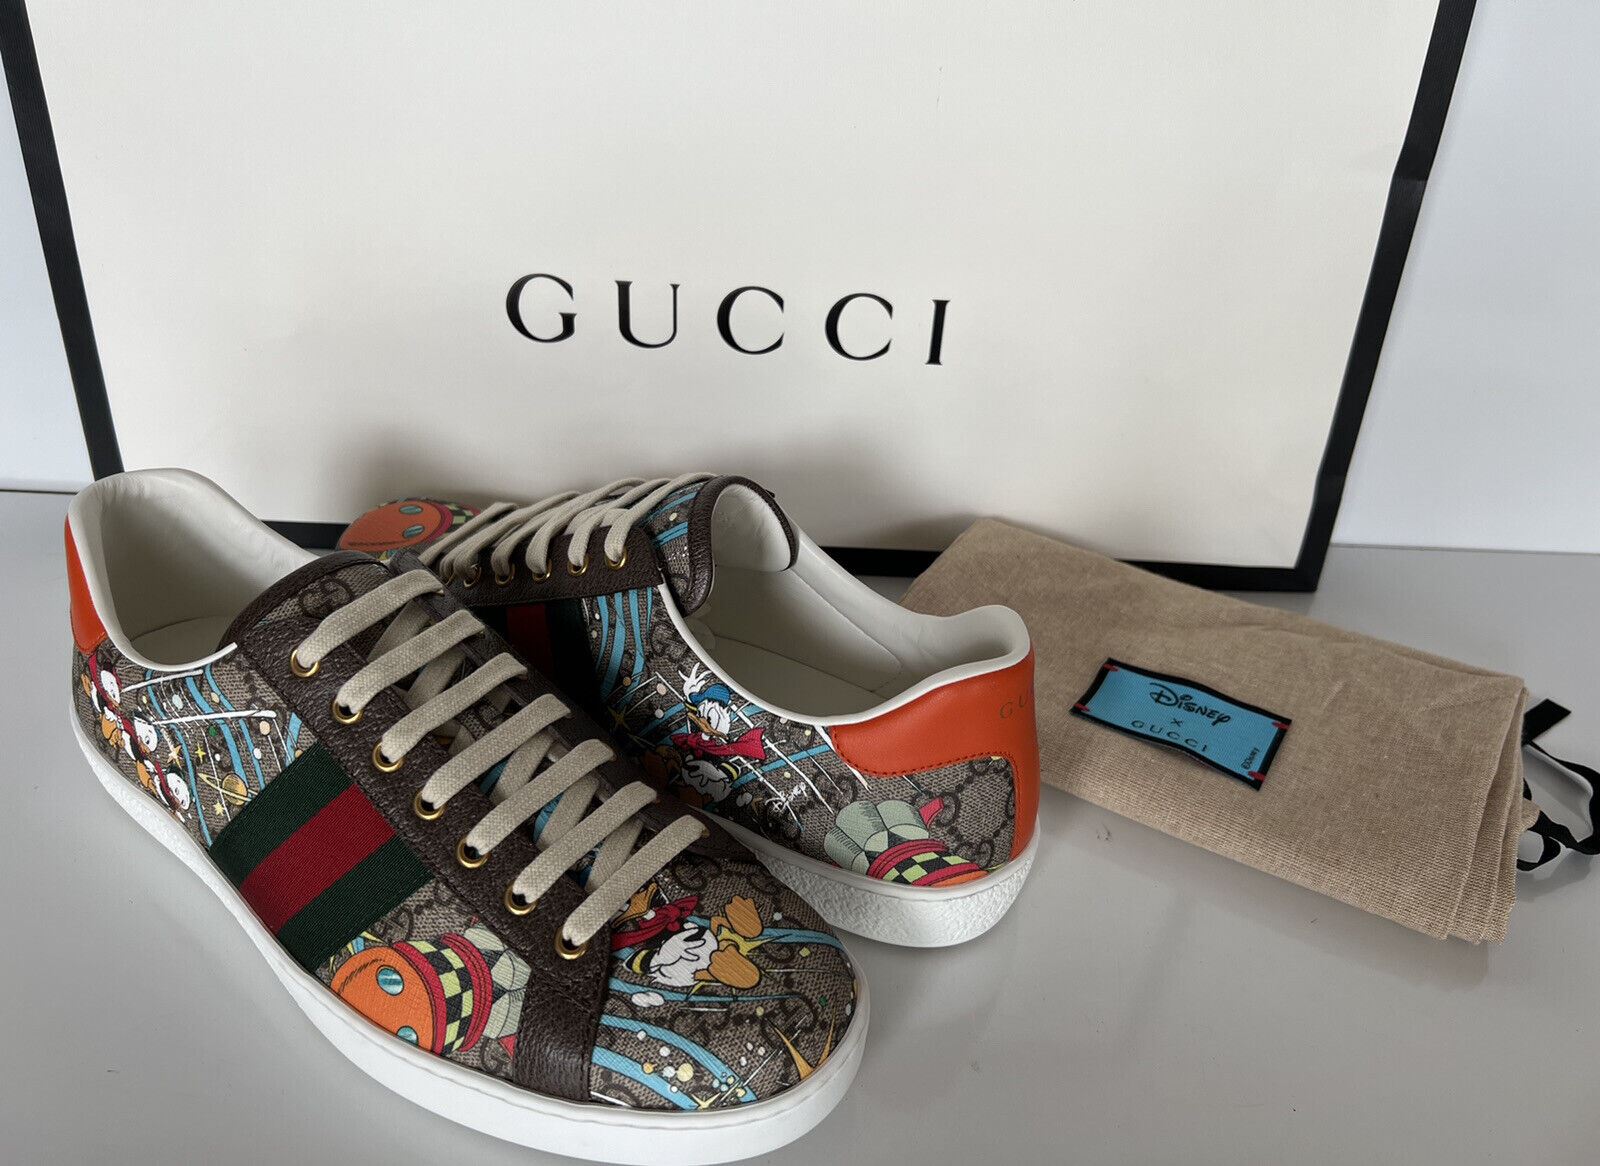 NIB Gucci Men’s Donald Duck Sneakers 10.5 US (Gucci 10) Made in Italy 647950